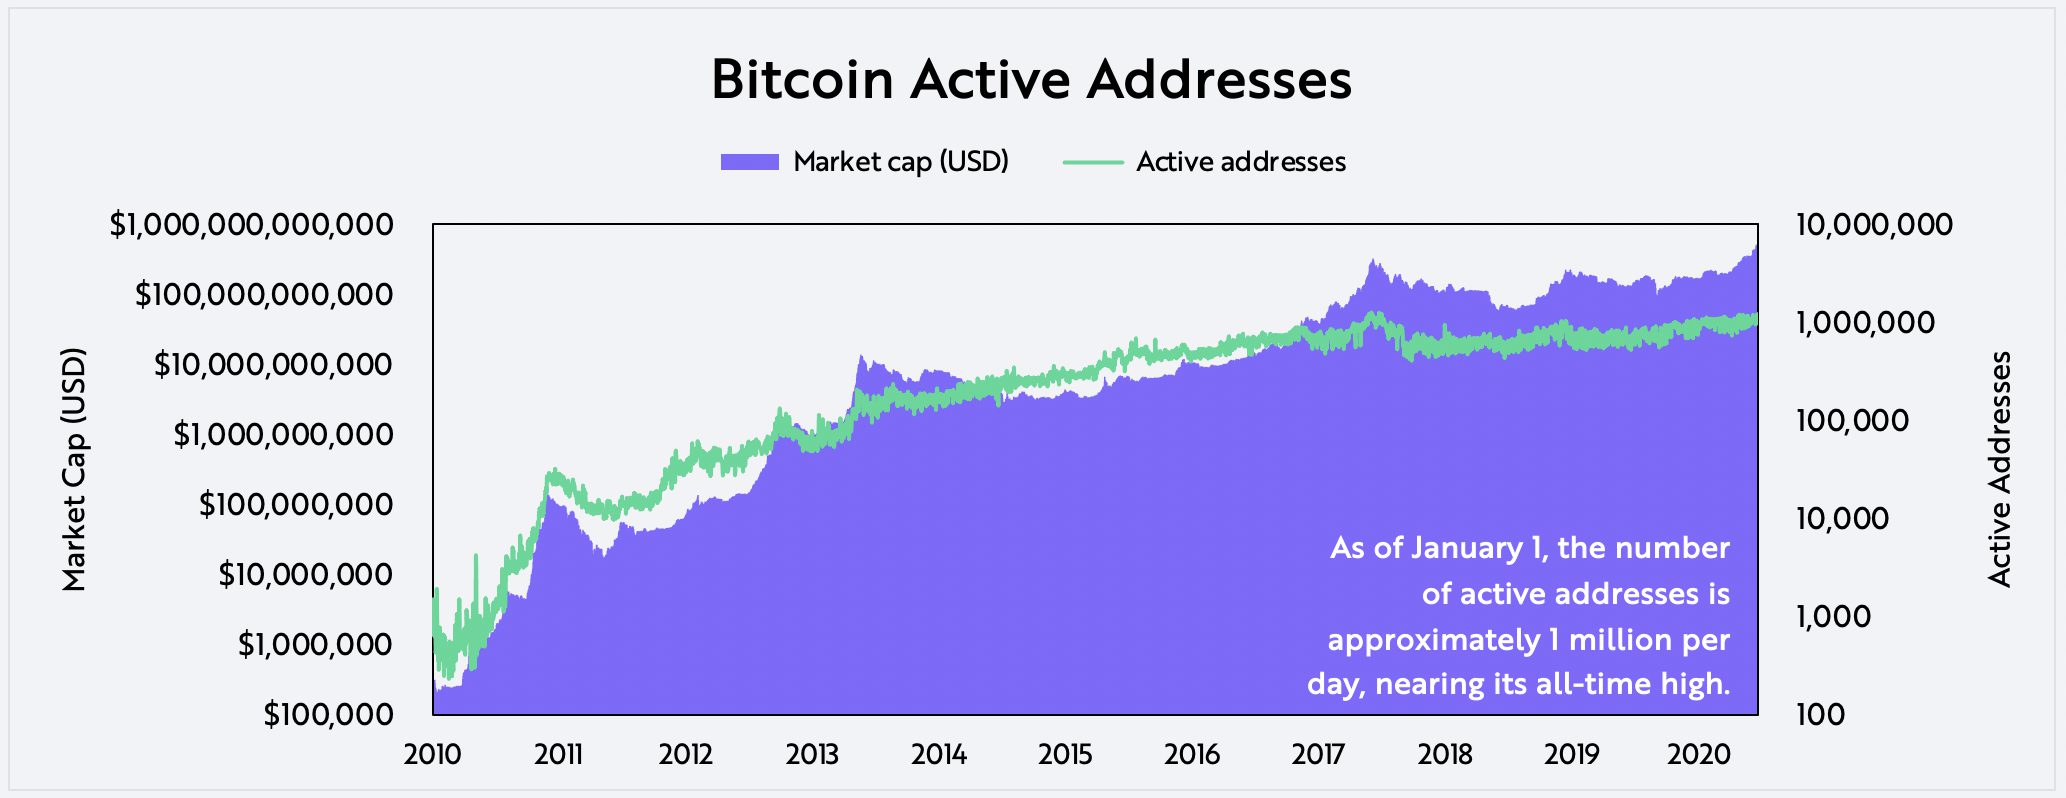 Evaluating Bitcoin Active Addresses on-chain data